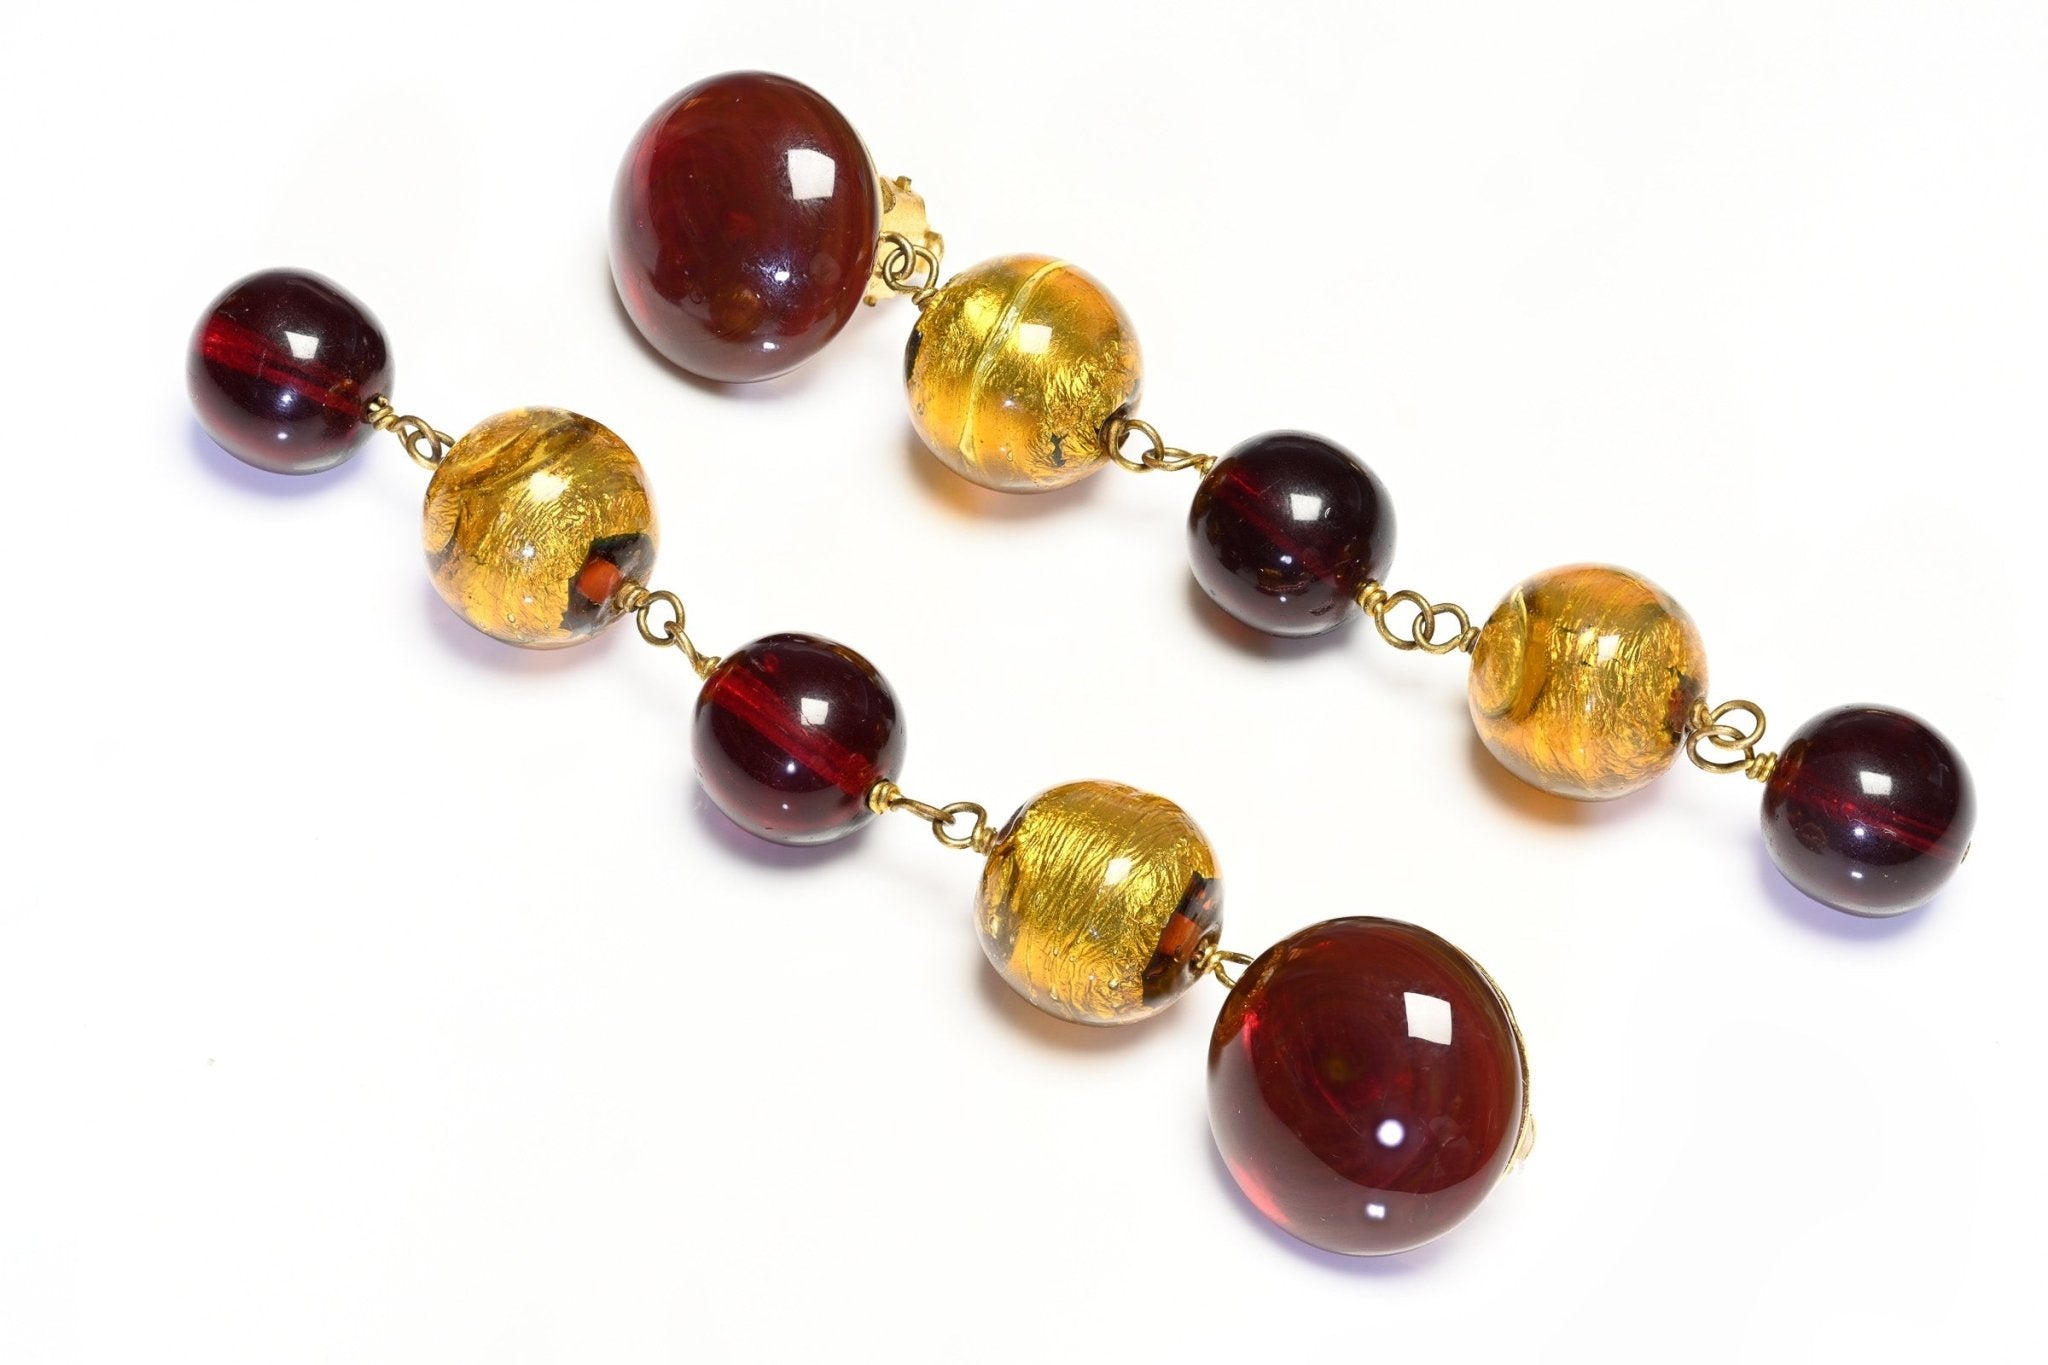 Vintage Frances Patiky Stein FPS Gripoix Red Gold Glass Beads Shoulder Duster Earrings